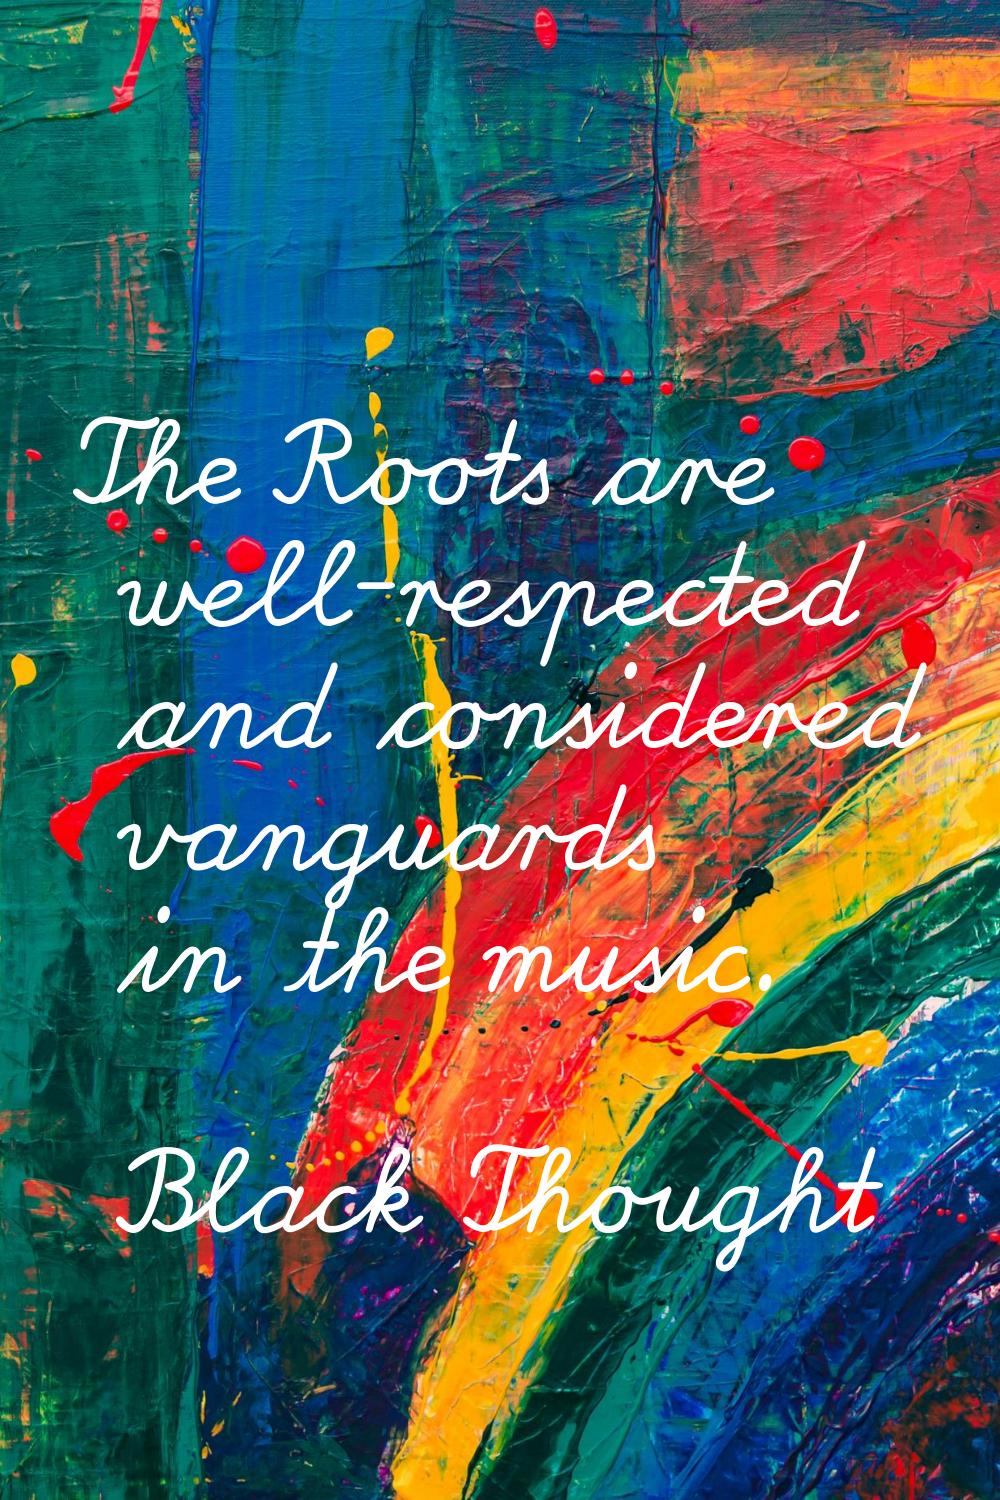 The Roots are well-respected and considered vanguards in the music.